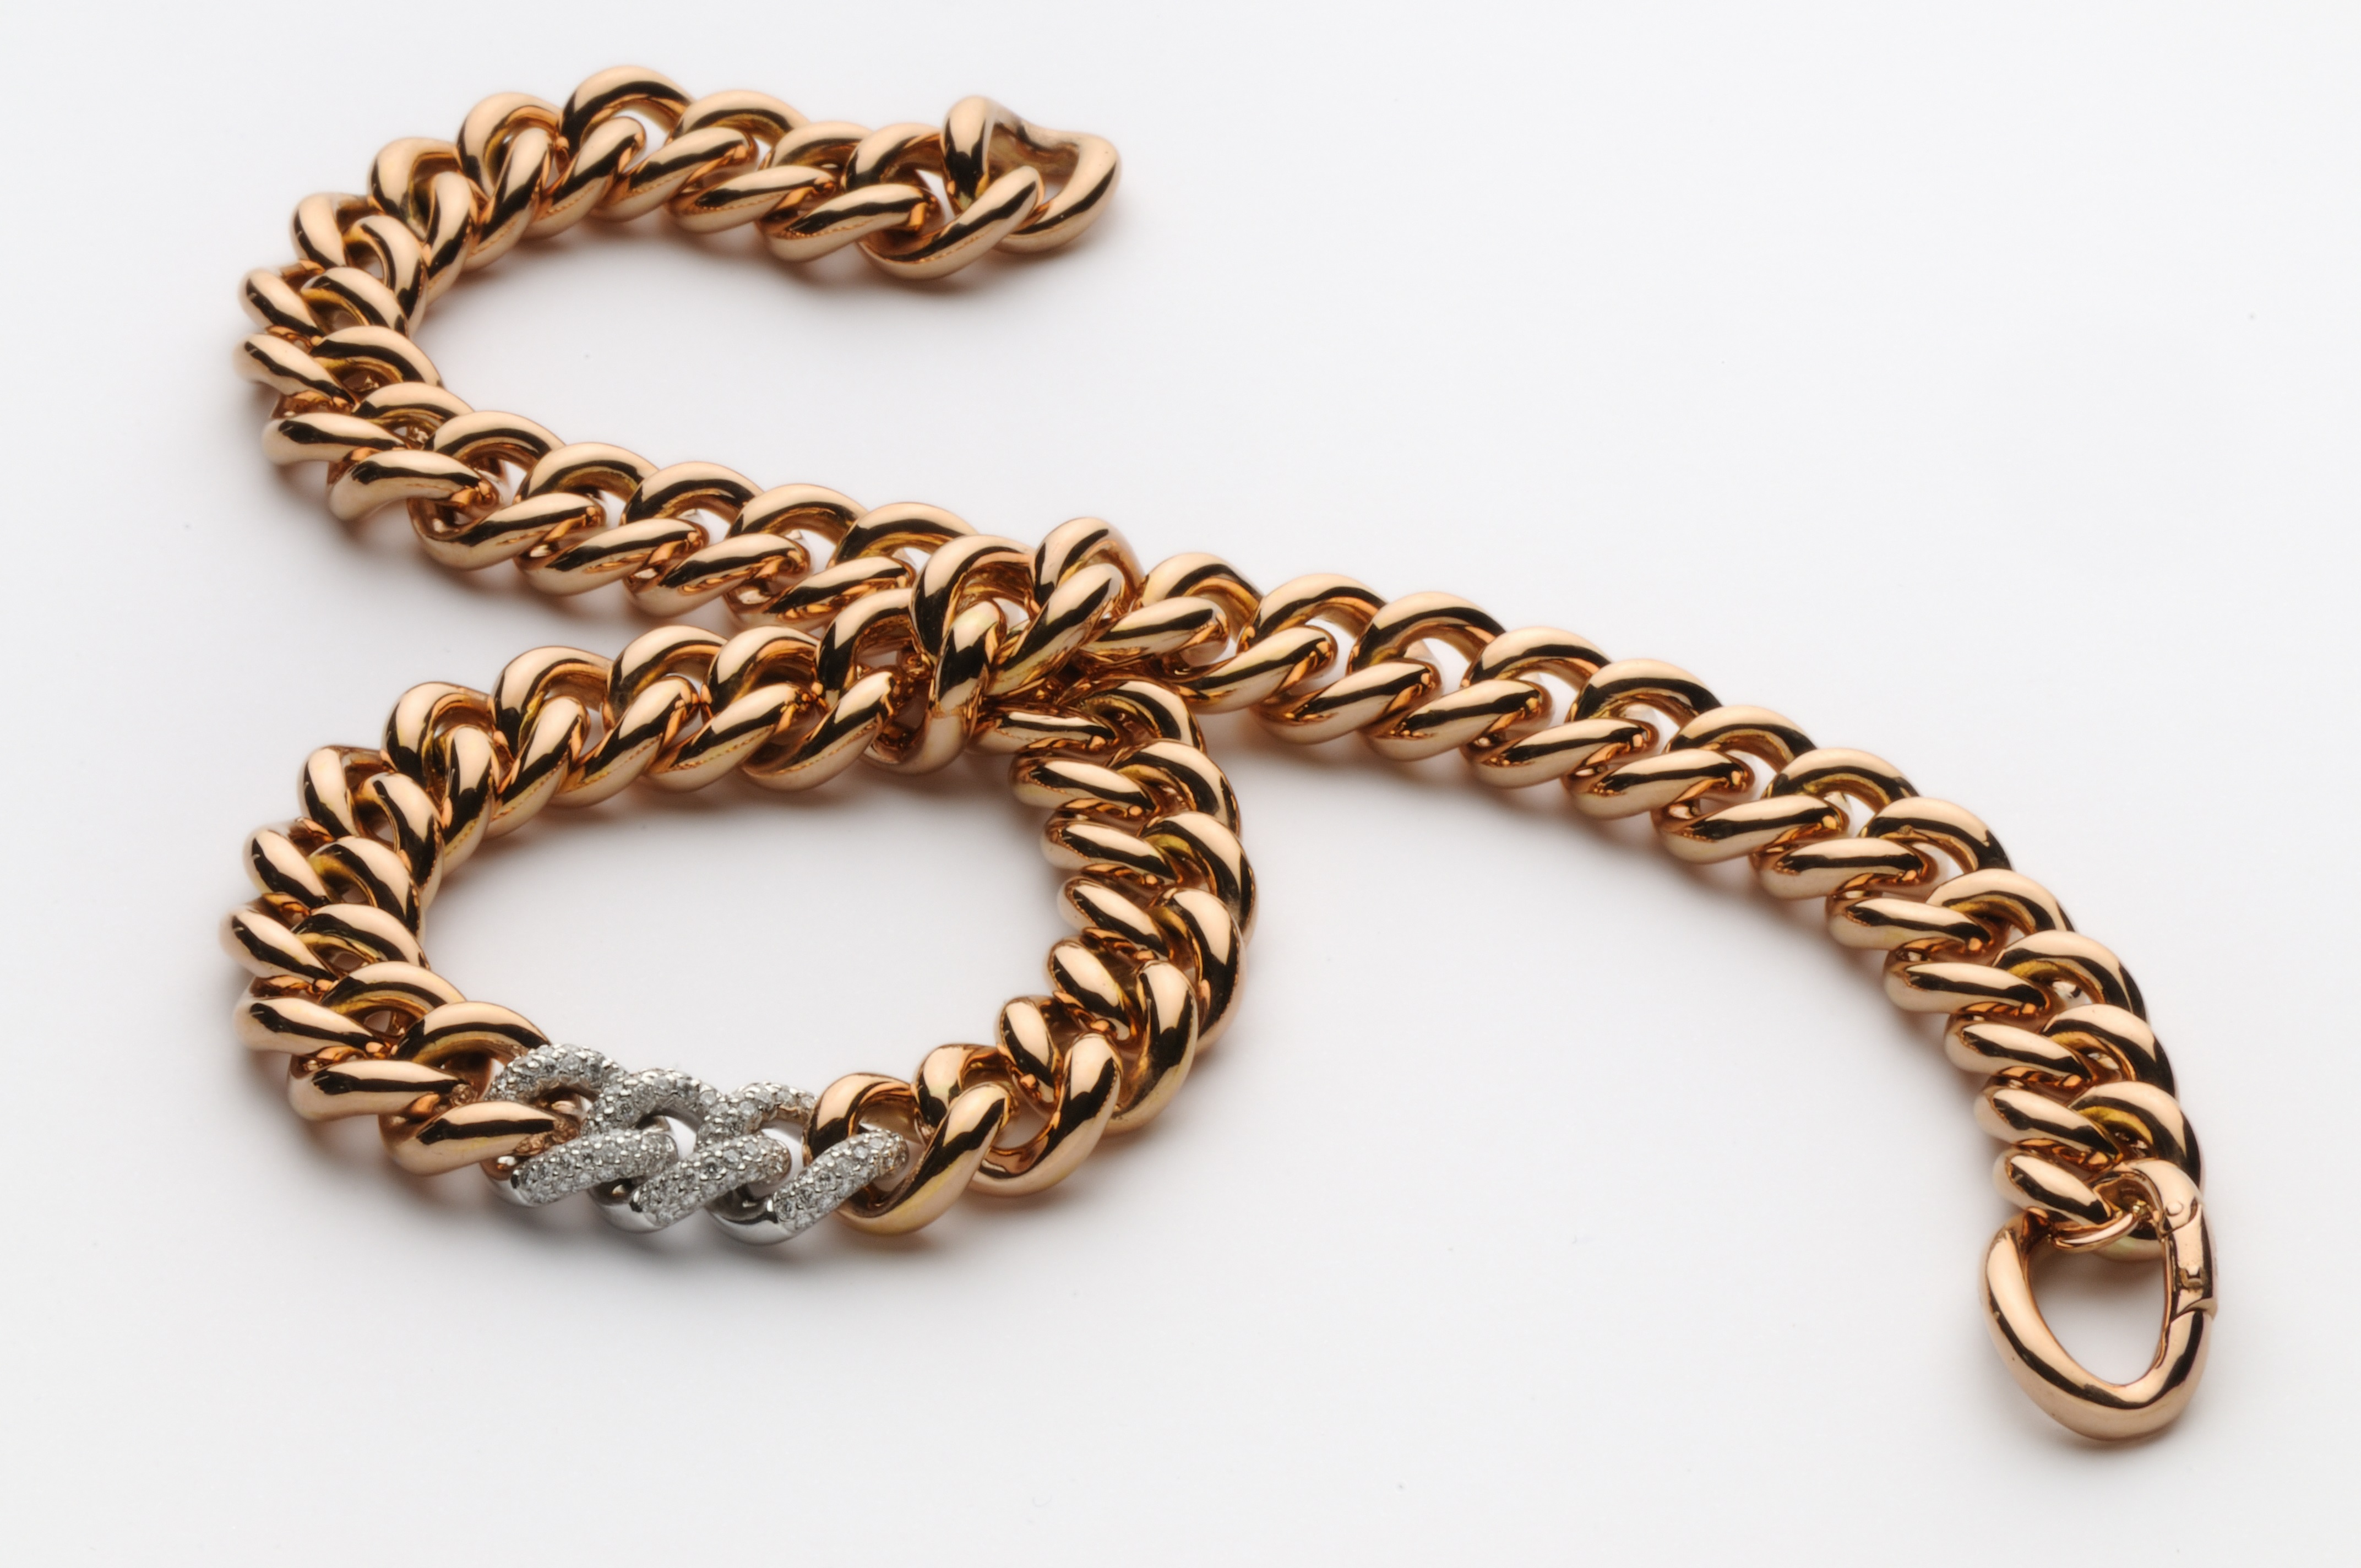 gold links